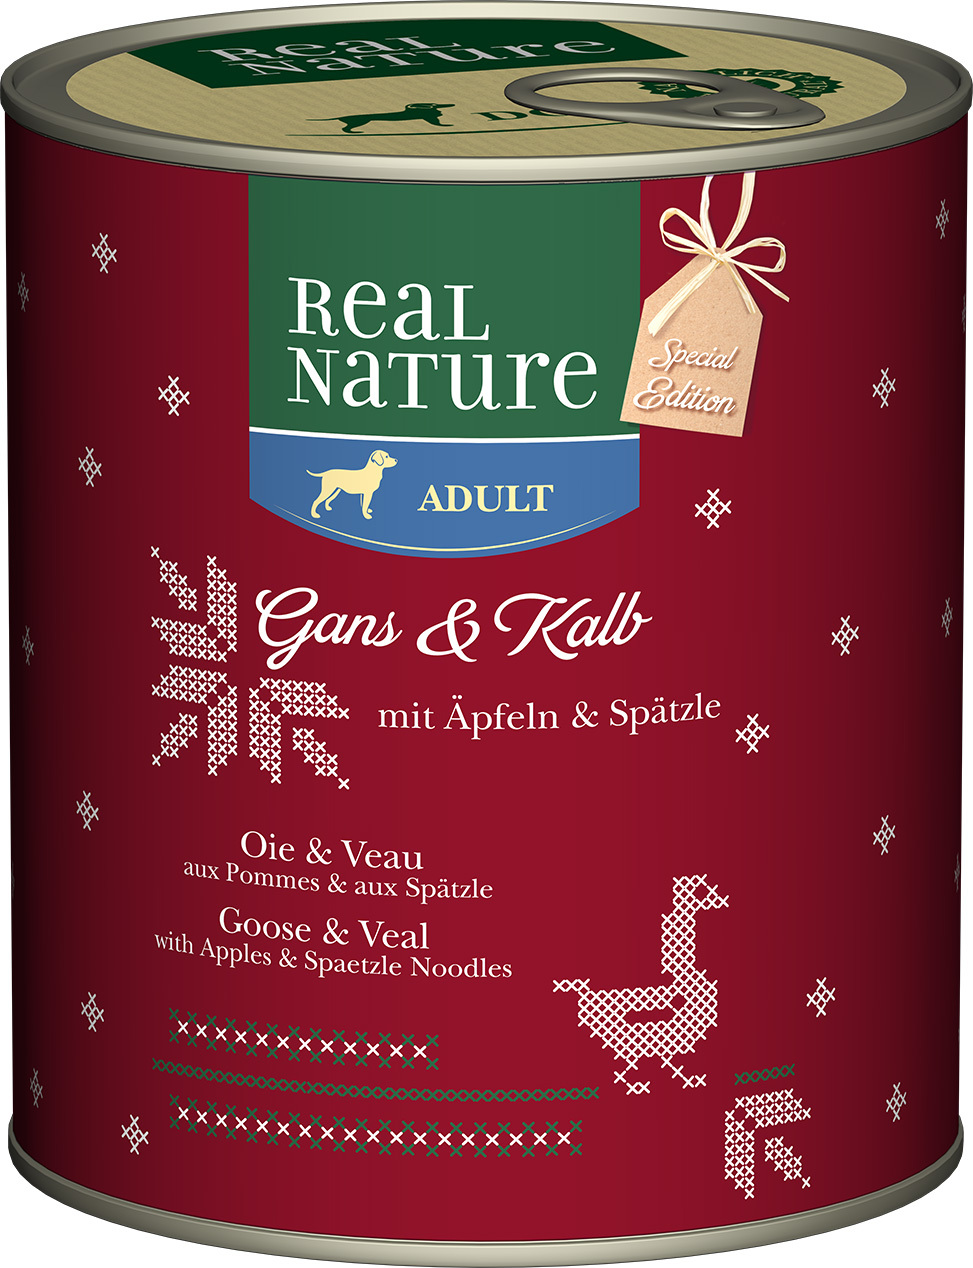 REAL NATURE Adult 6x800g Special Edition: Gans & Kalb